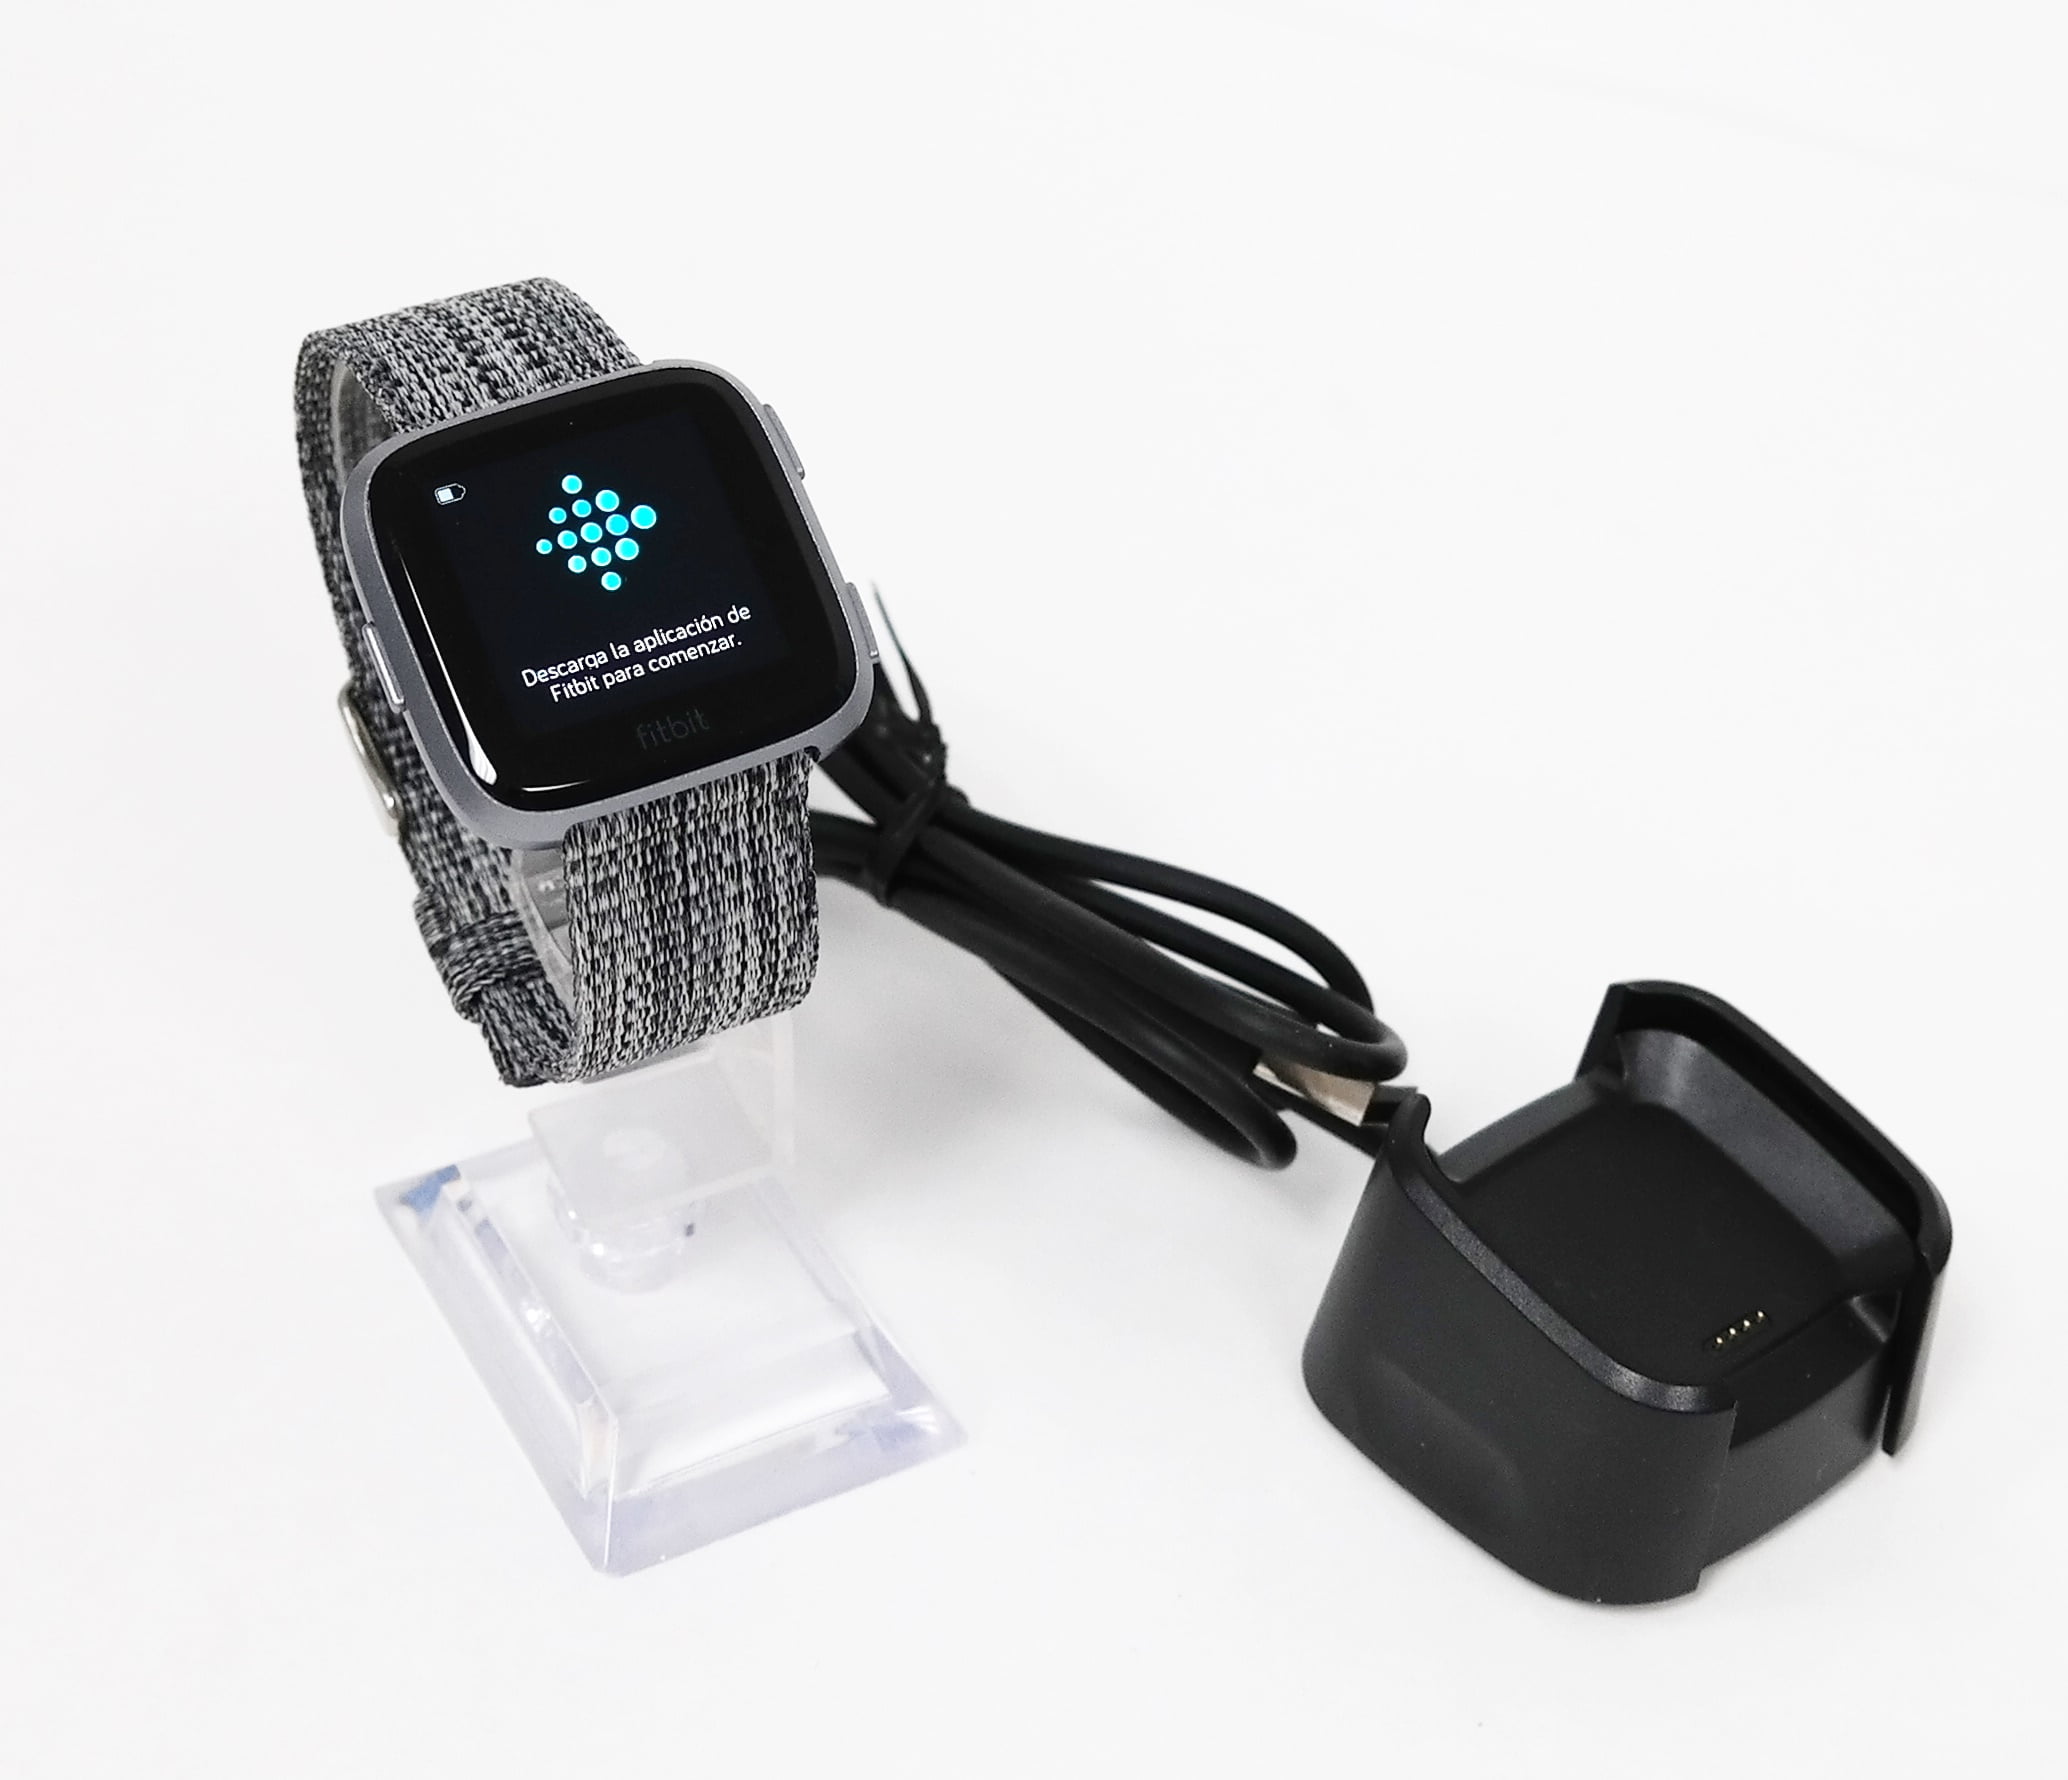 fitbit versa special edition watch fb505bkgy